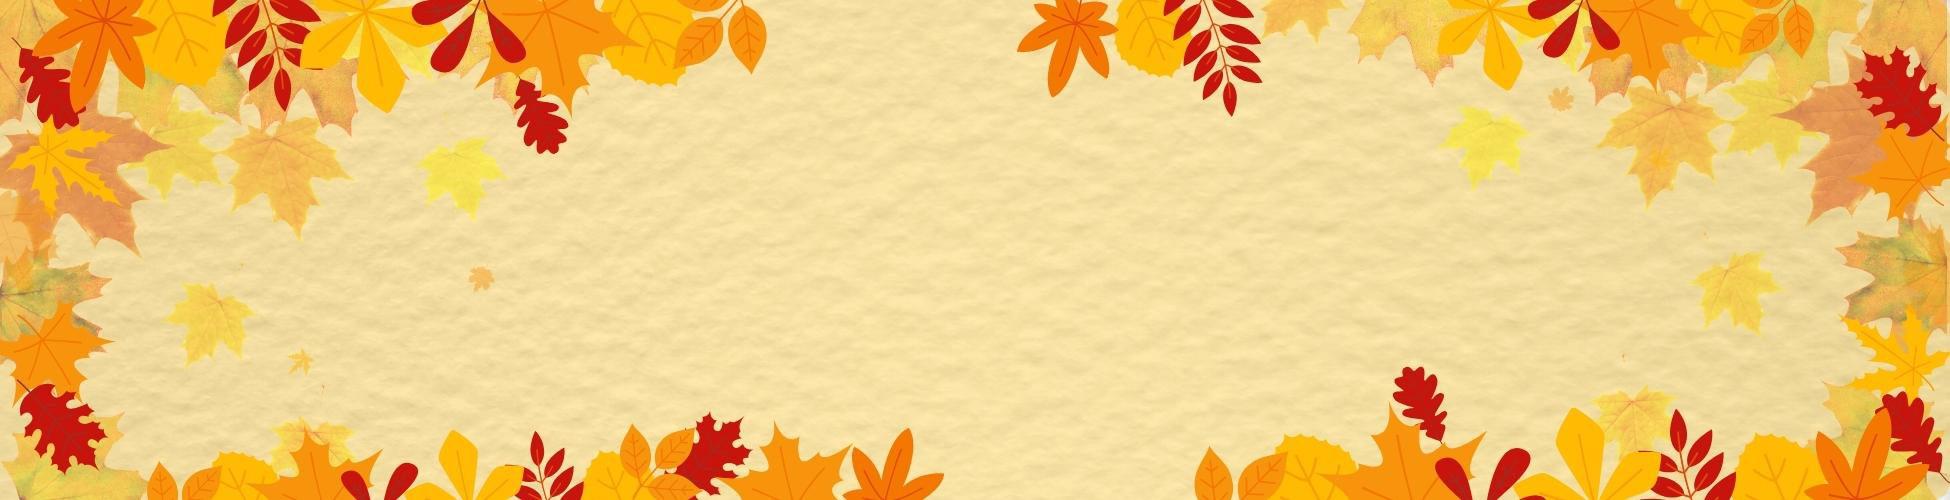 fall background